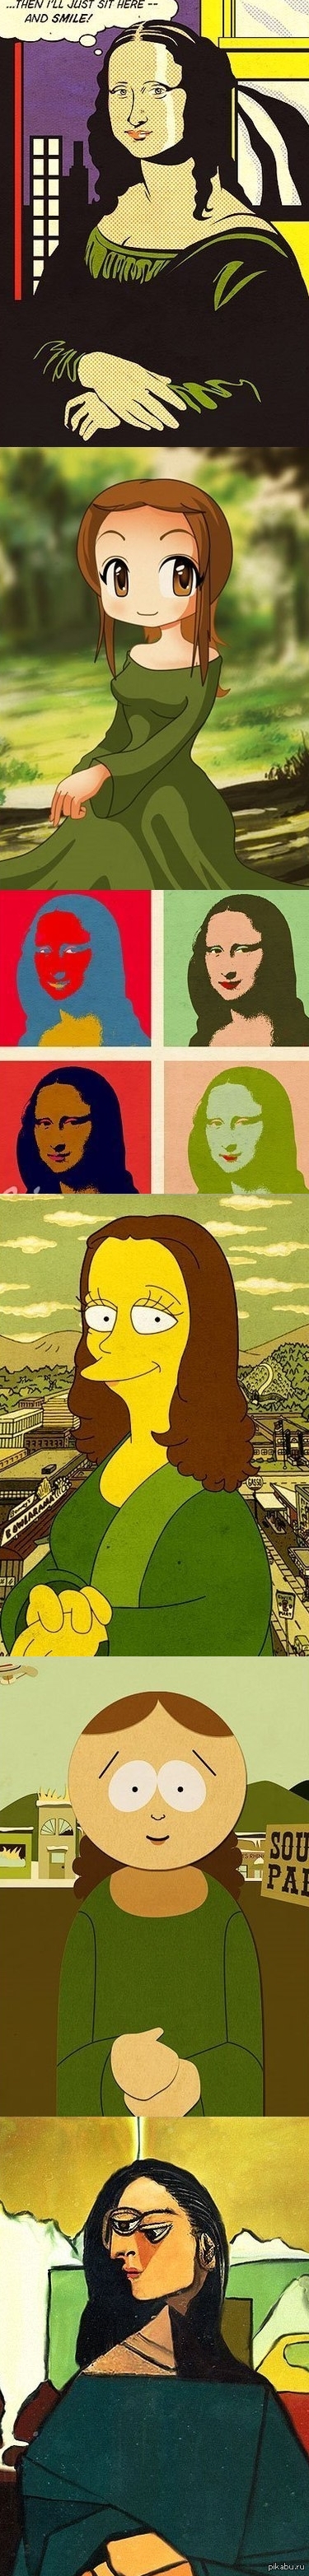 If Mona Lisa was painted by modern artists, then it would probably look like this: - My, Modern Art, AND, Mona lisa, Tag